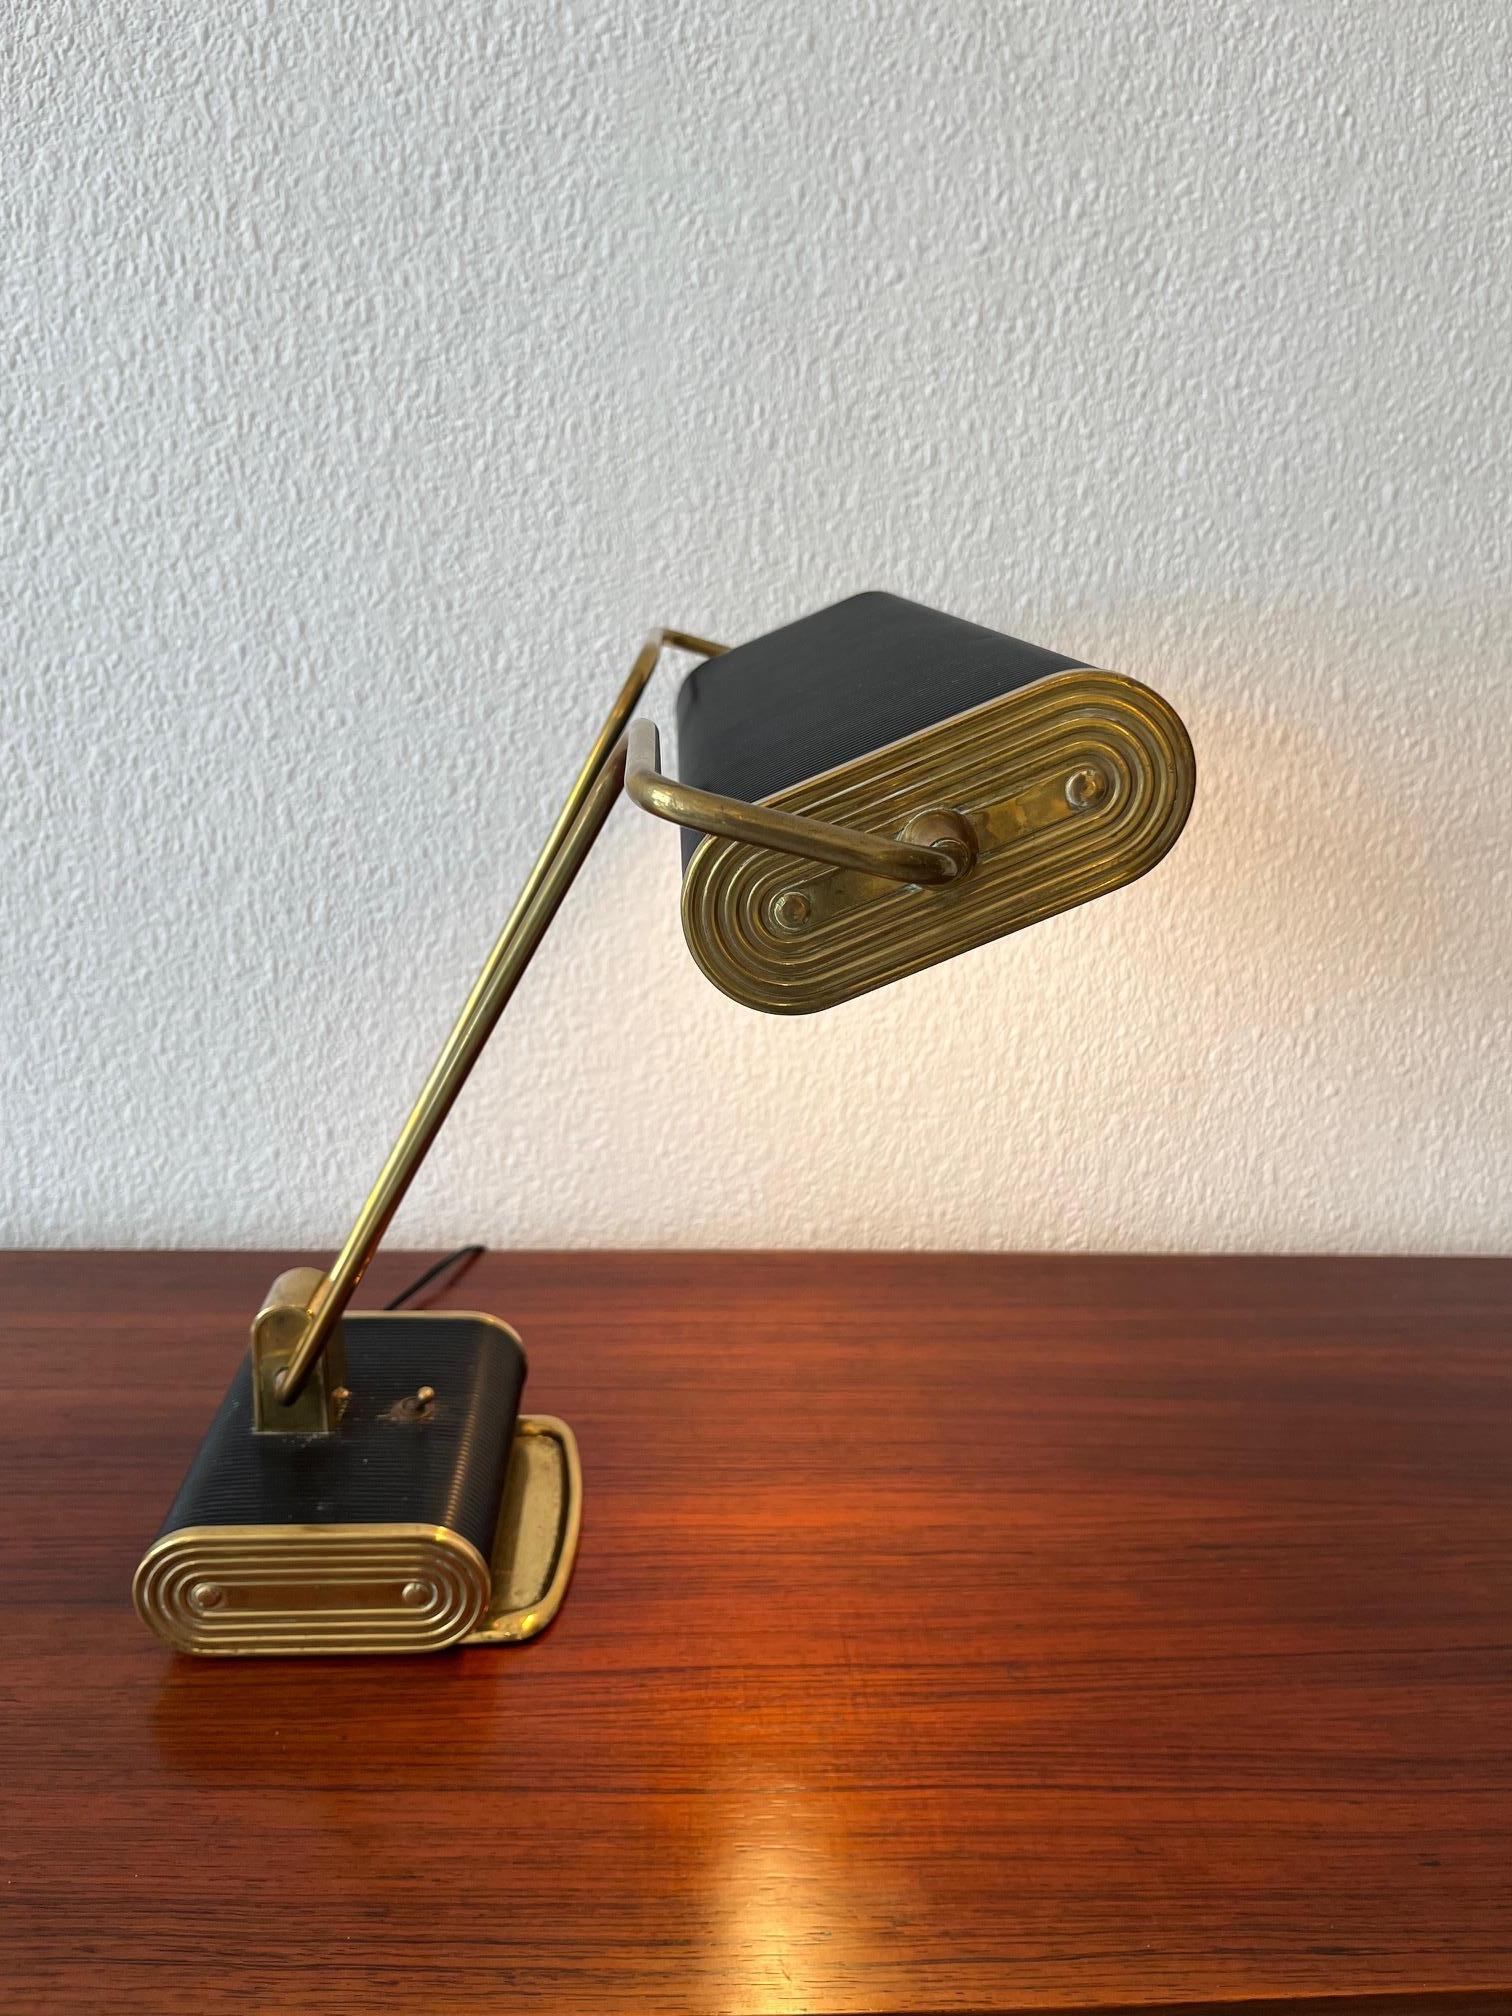 Brass & Aluminum Adjustable Desk Lamp by Eileen Gray for Jumo, France ca. 1940s For Sale 7